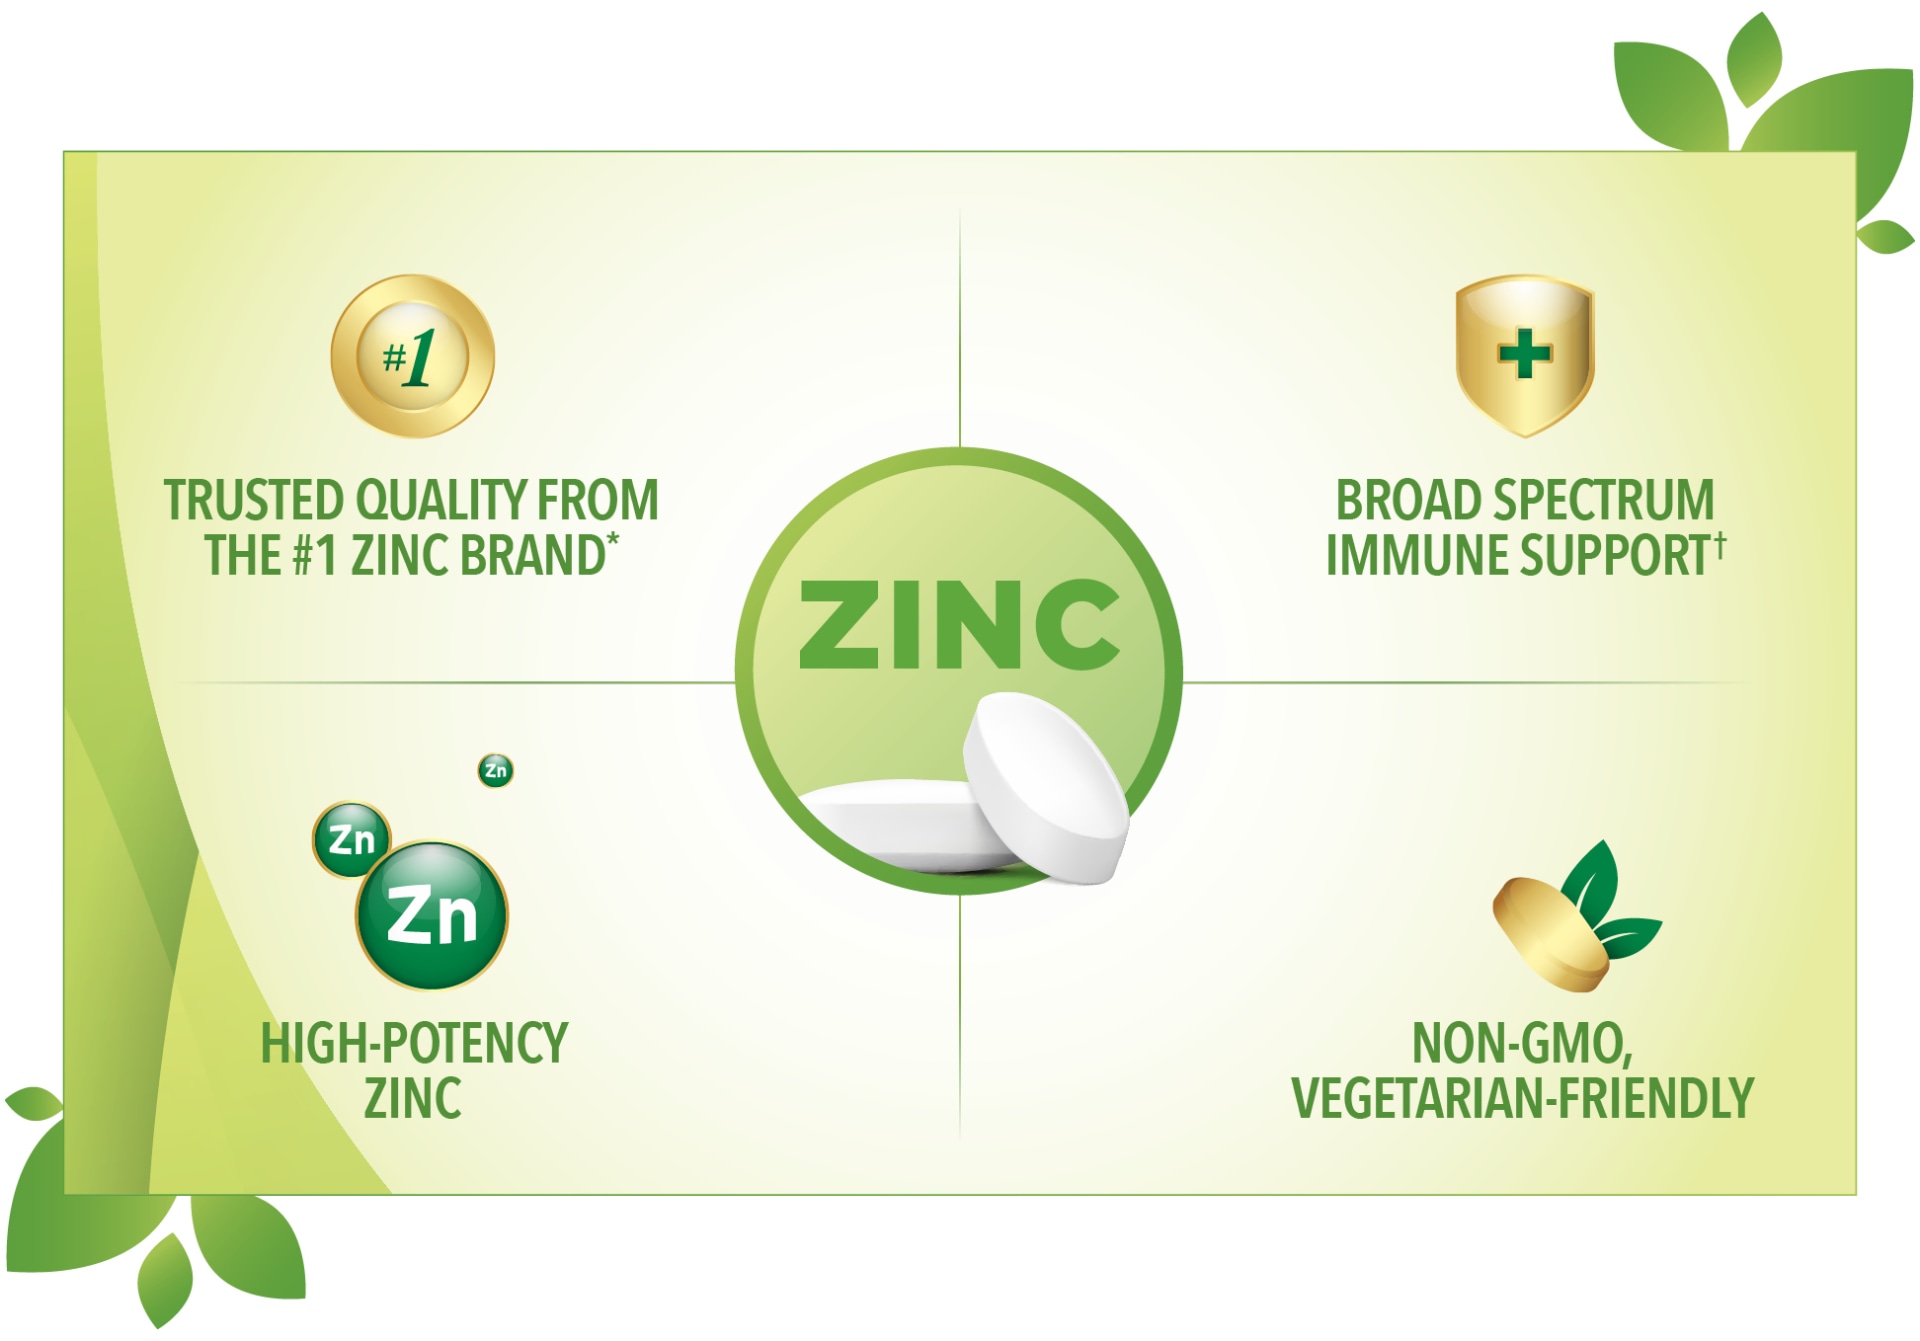 Trusted Quality From the #1 Zinc Brand* 